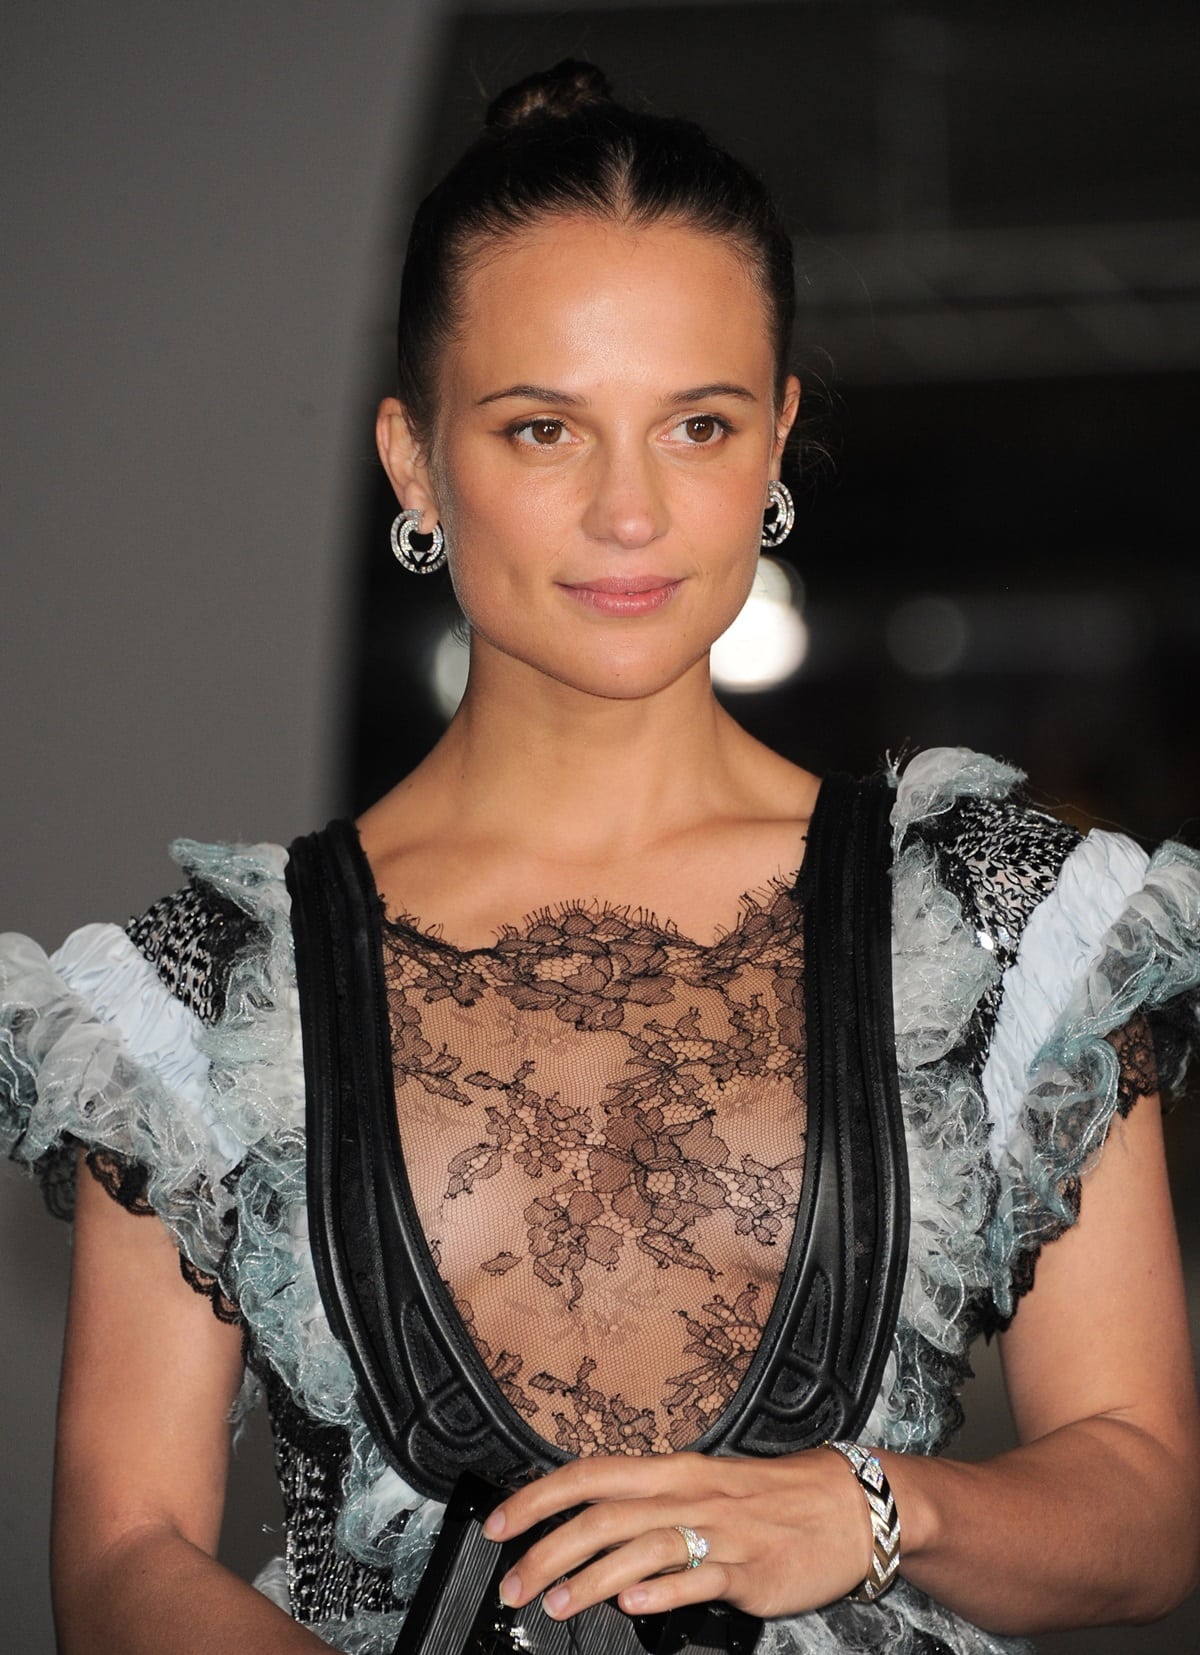 Alicia Vikander's ethnicity is a mix of Swedish, Finnish, and distant Baltic German heritage